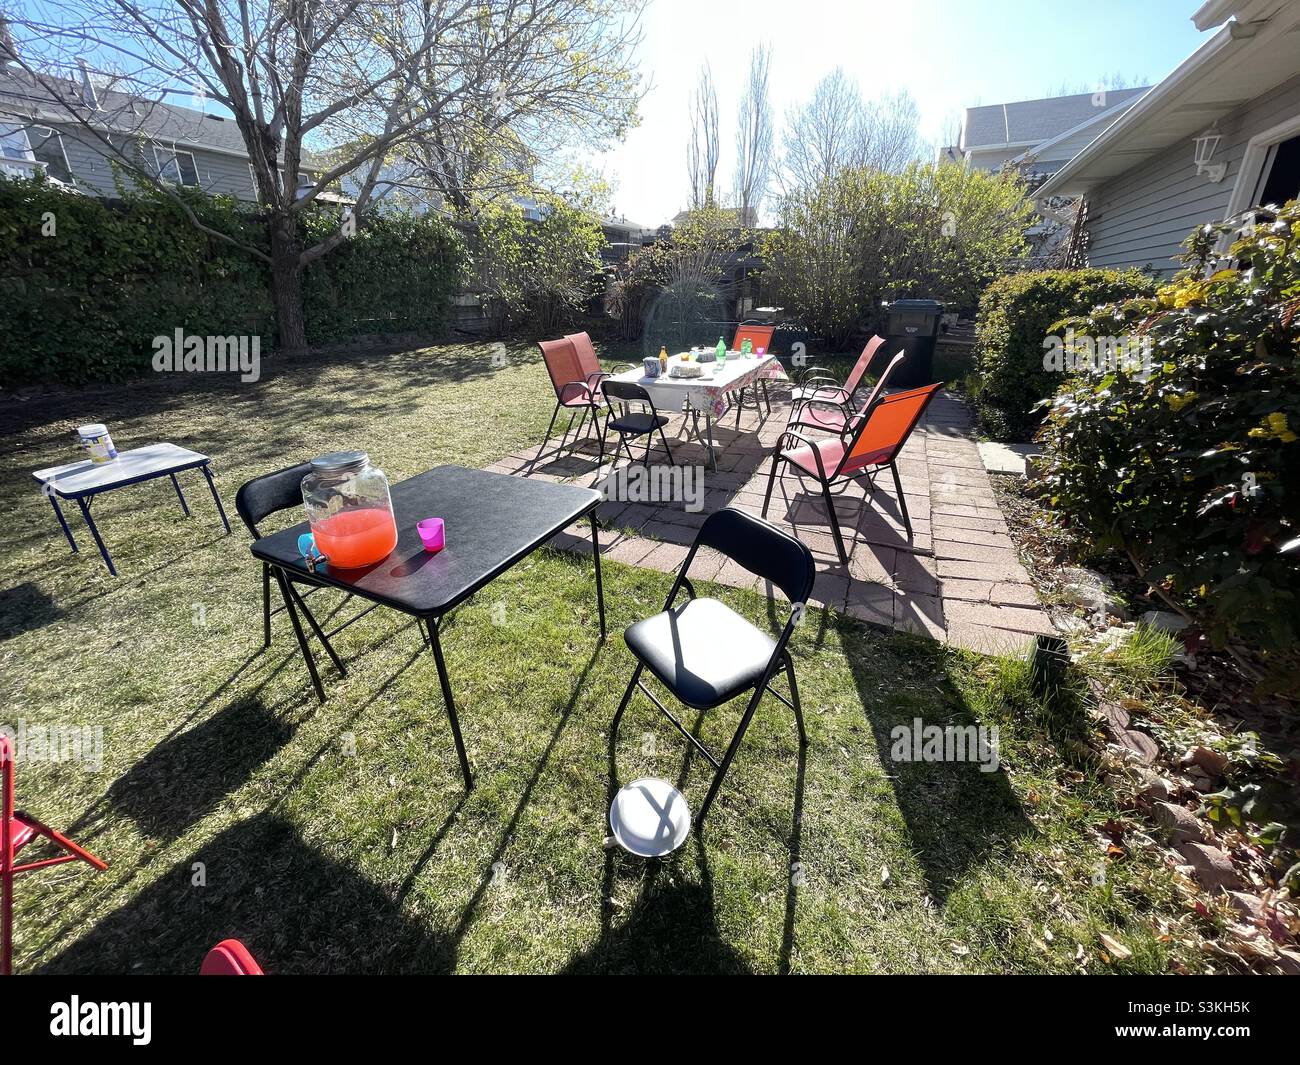 A patio and backyard in the summertime after a family get together and party. Cleanup is still incomplete with tables, chairs, food and drink leftovers lying about. Stock Photo